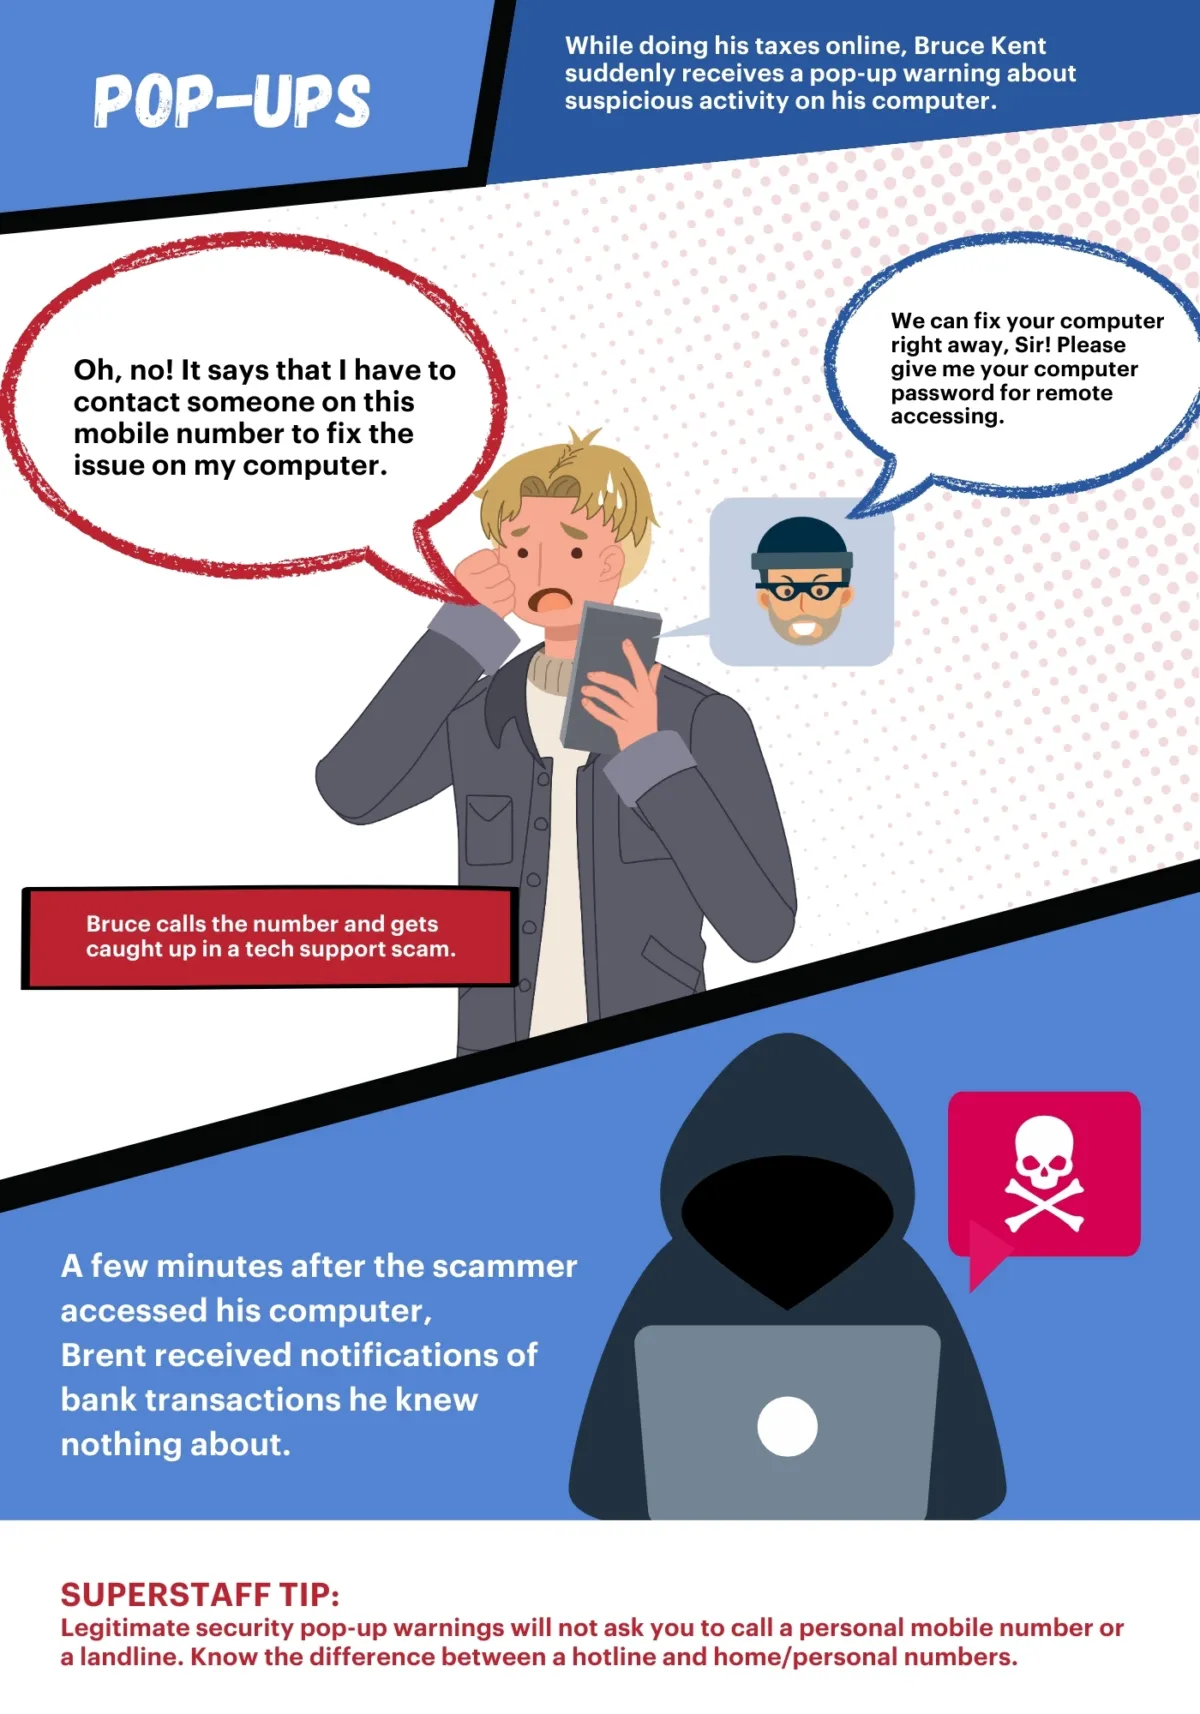 A comic strip shows how scammers use pop-ups to commit tech support fraud.